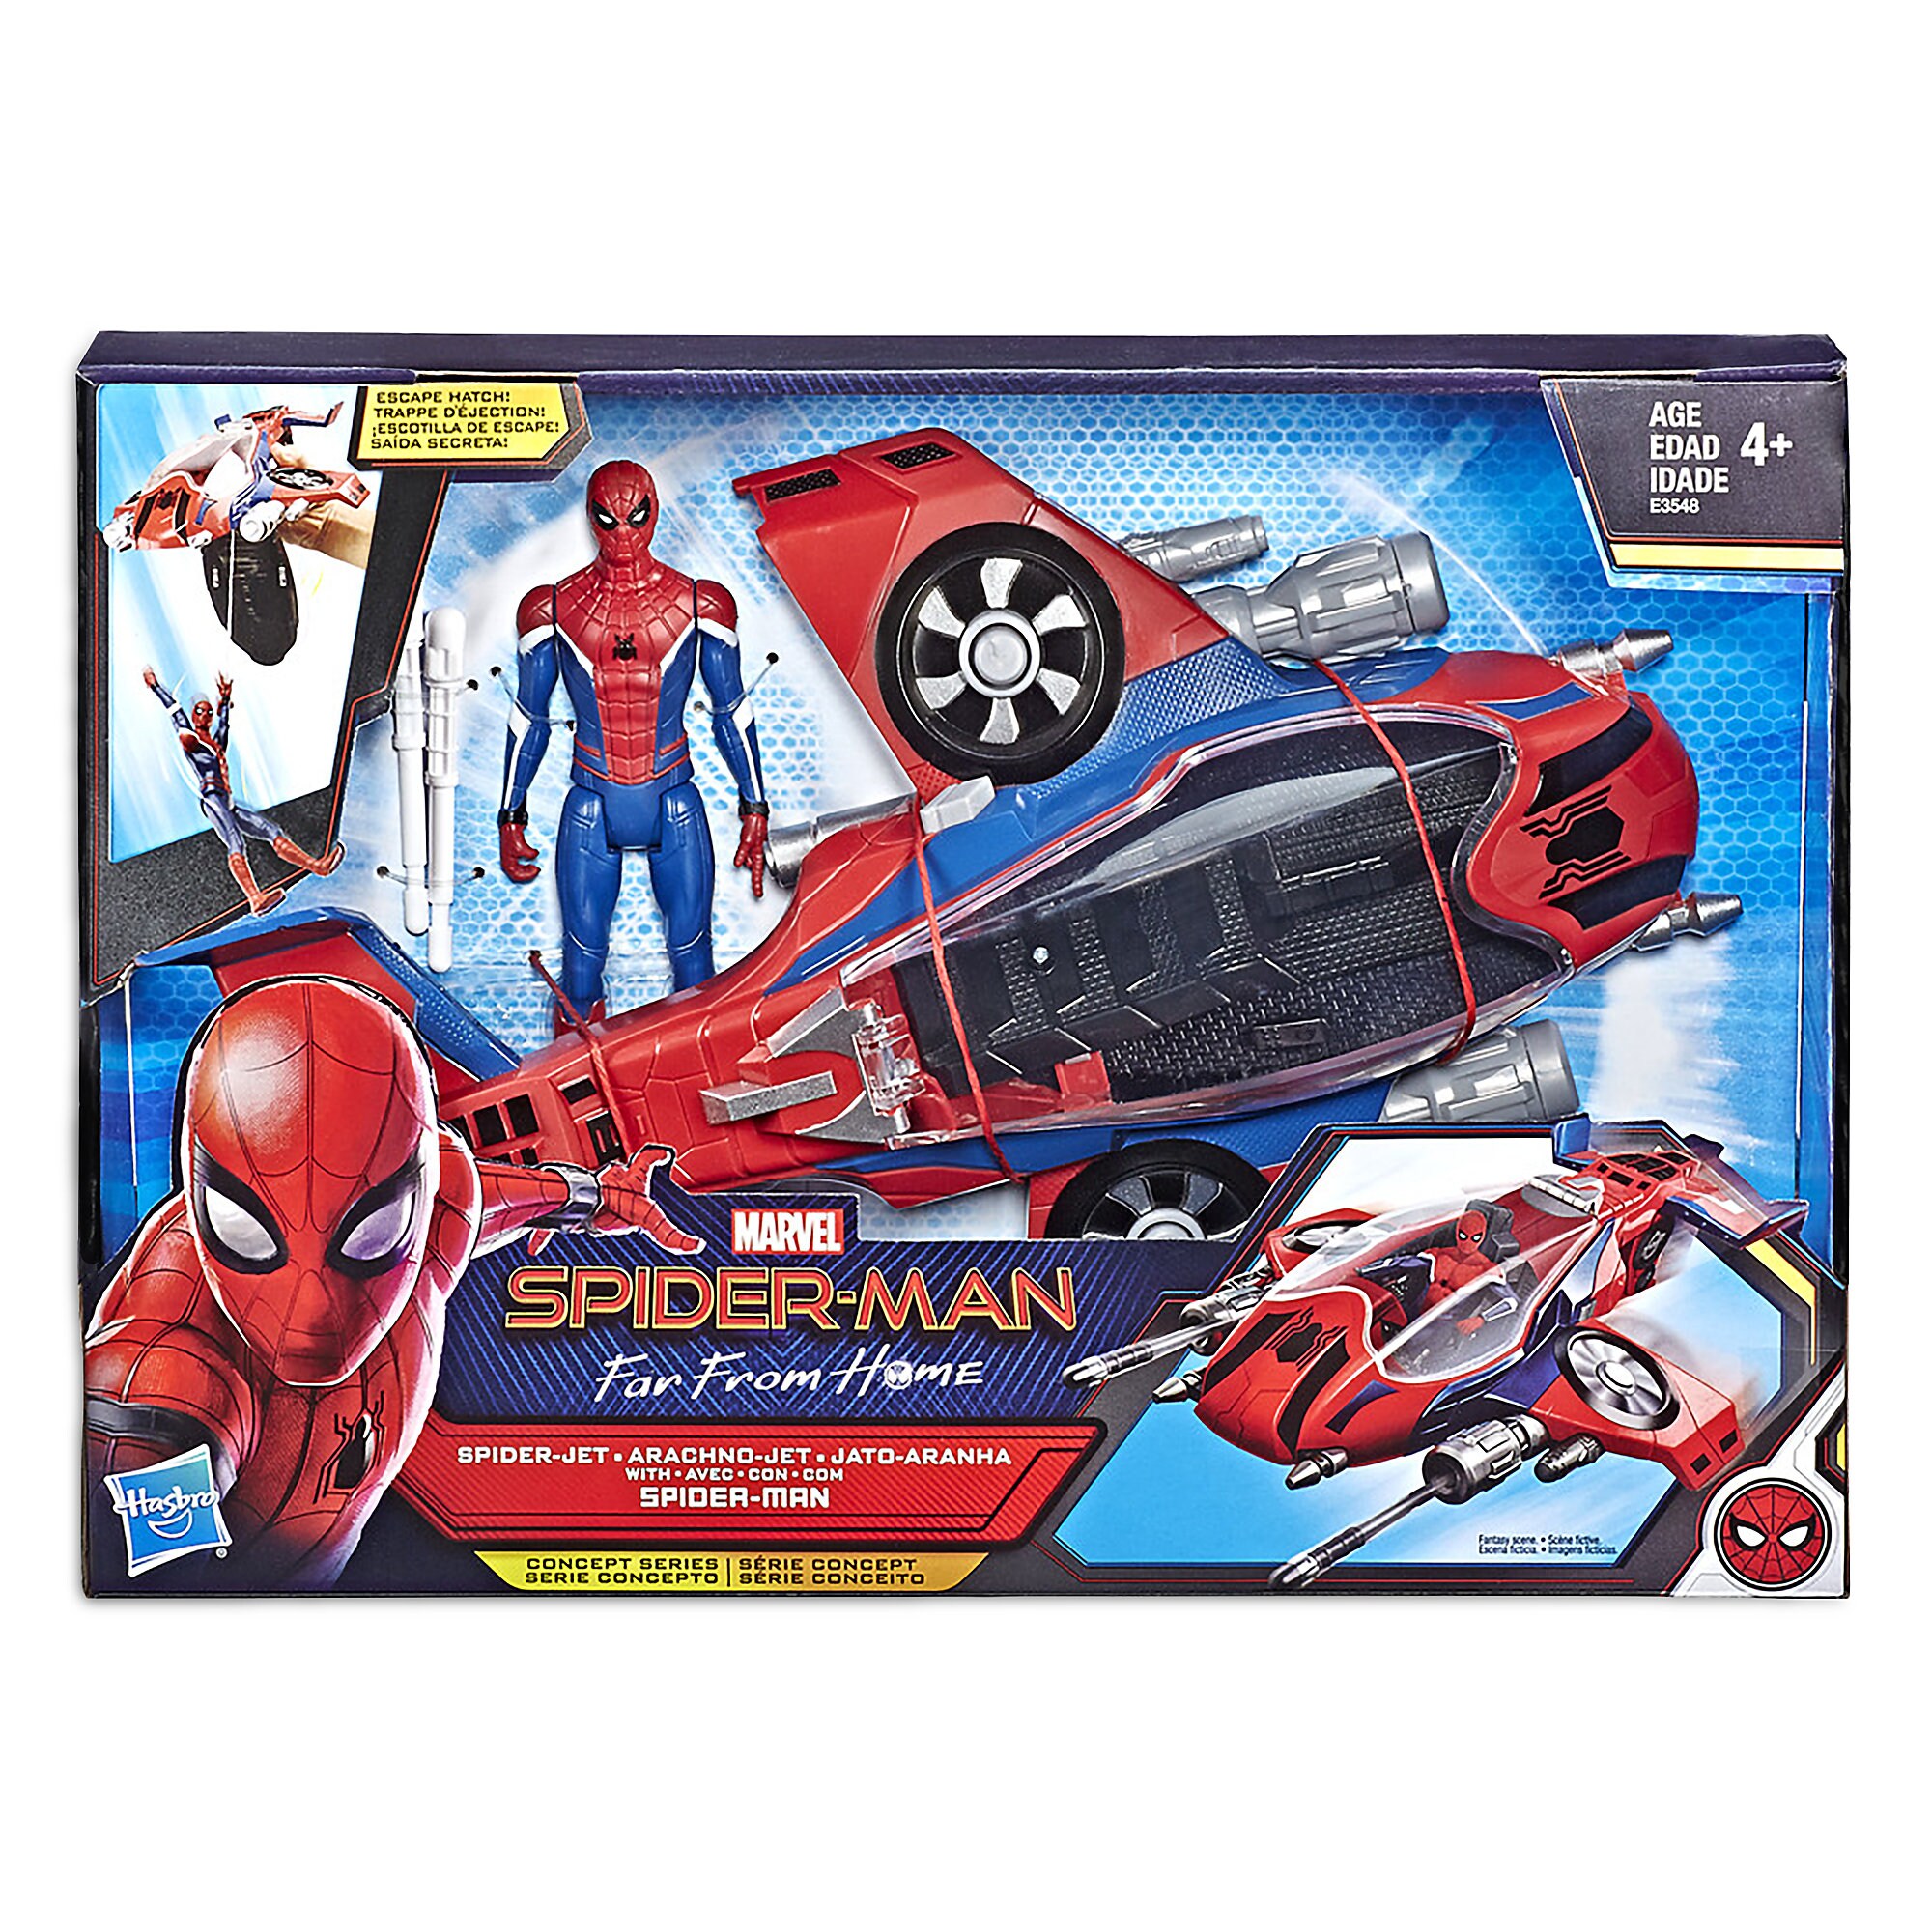 Spider-Man: Far From Home Action Figure with Spider-Jet Vehicle